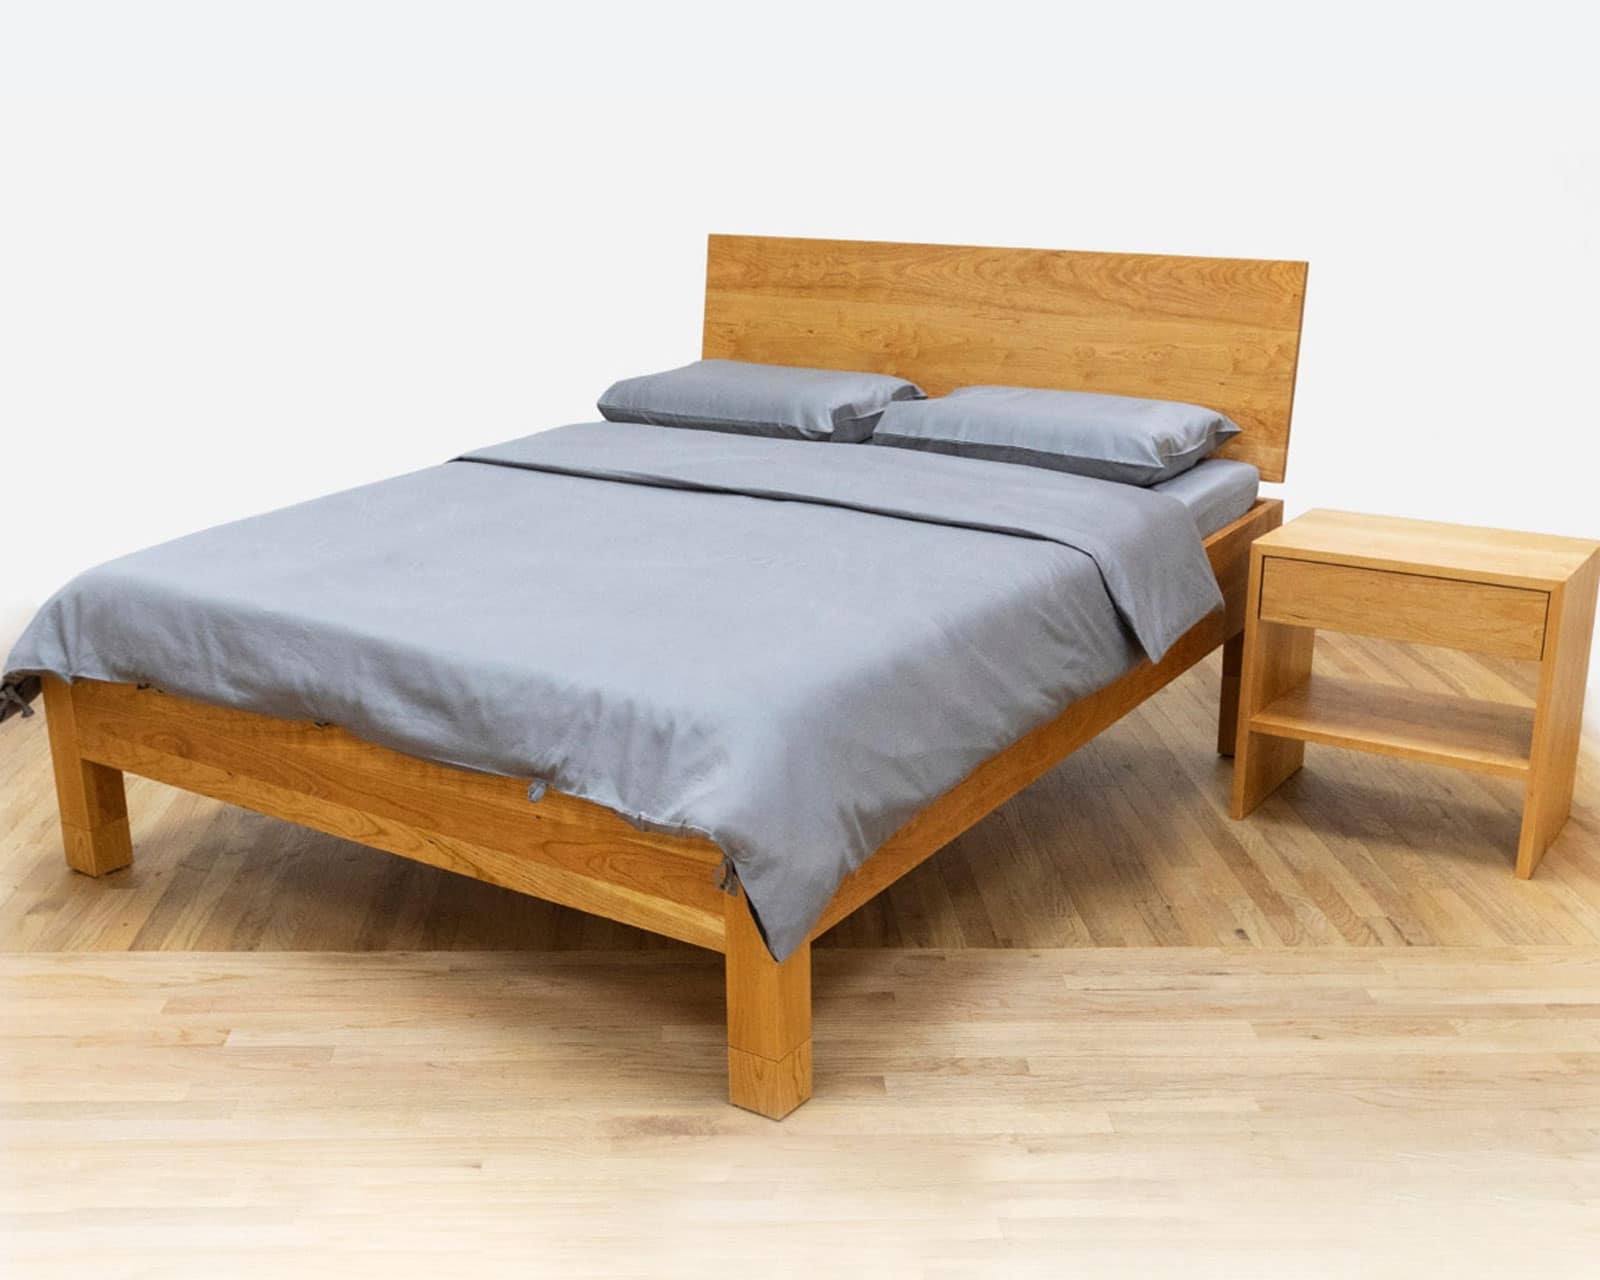 pummer-inclined-bed-frame-headboard-nighttable-cherry2